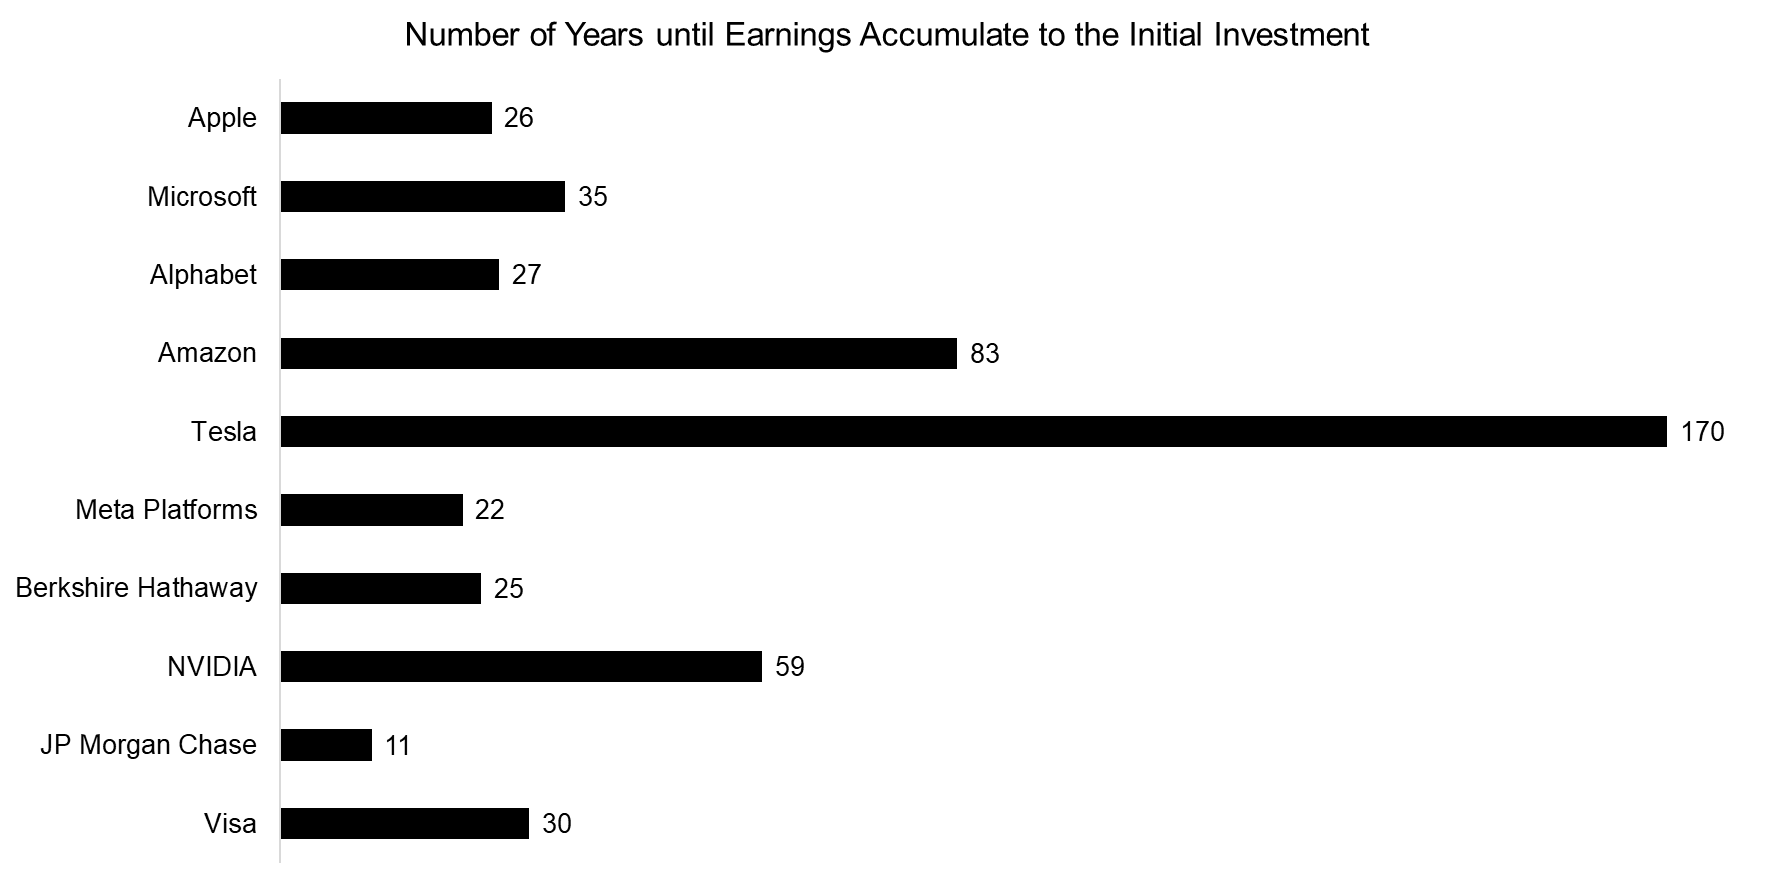 Number of Years until Earnings Accumulate to the Initial Investment